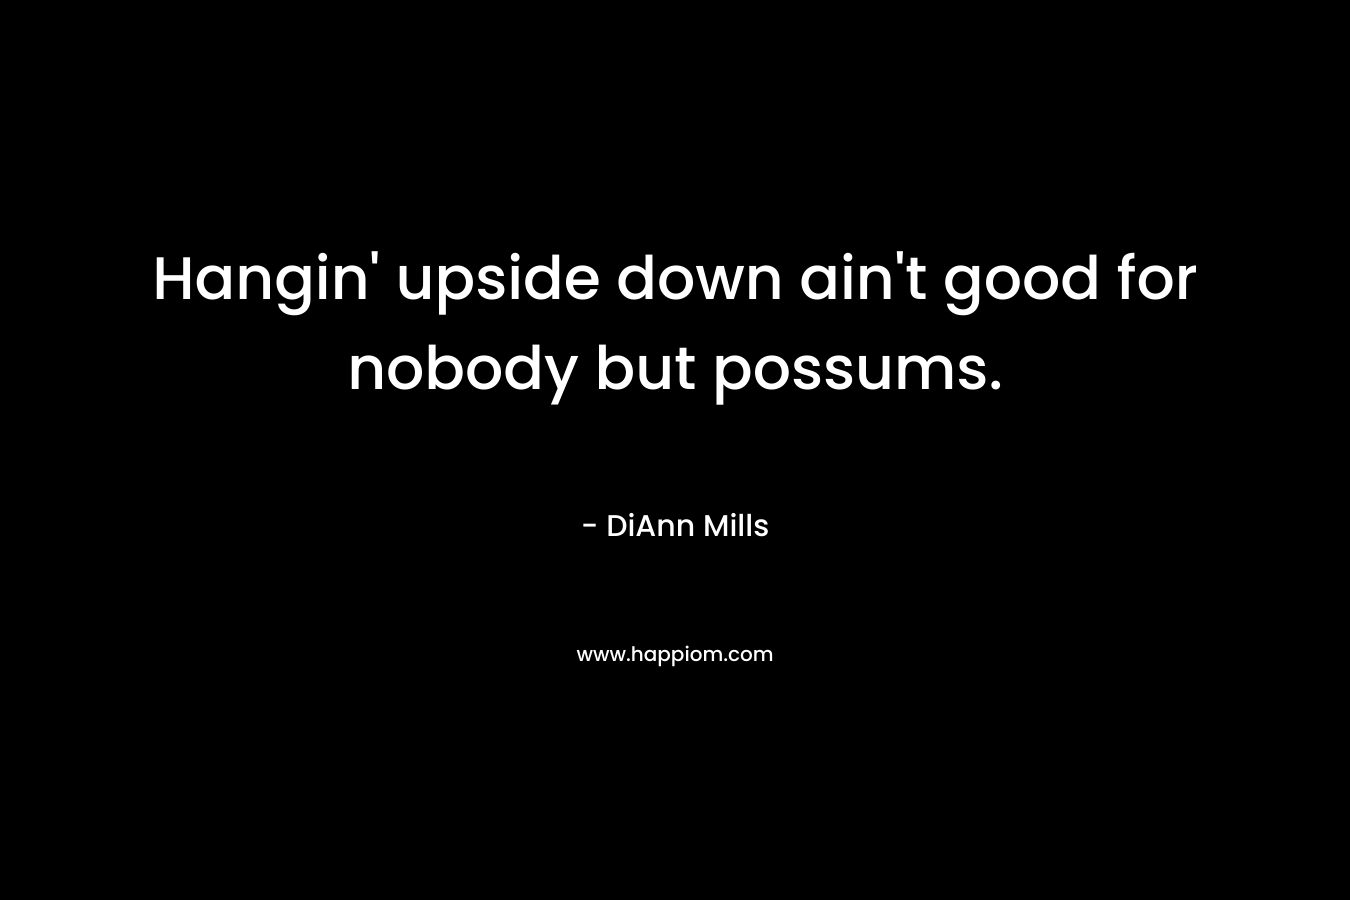 Hangin’ upside down ain’t good for nobody but possums. – DiAnn Mills